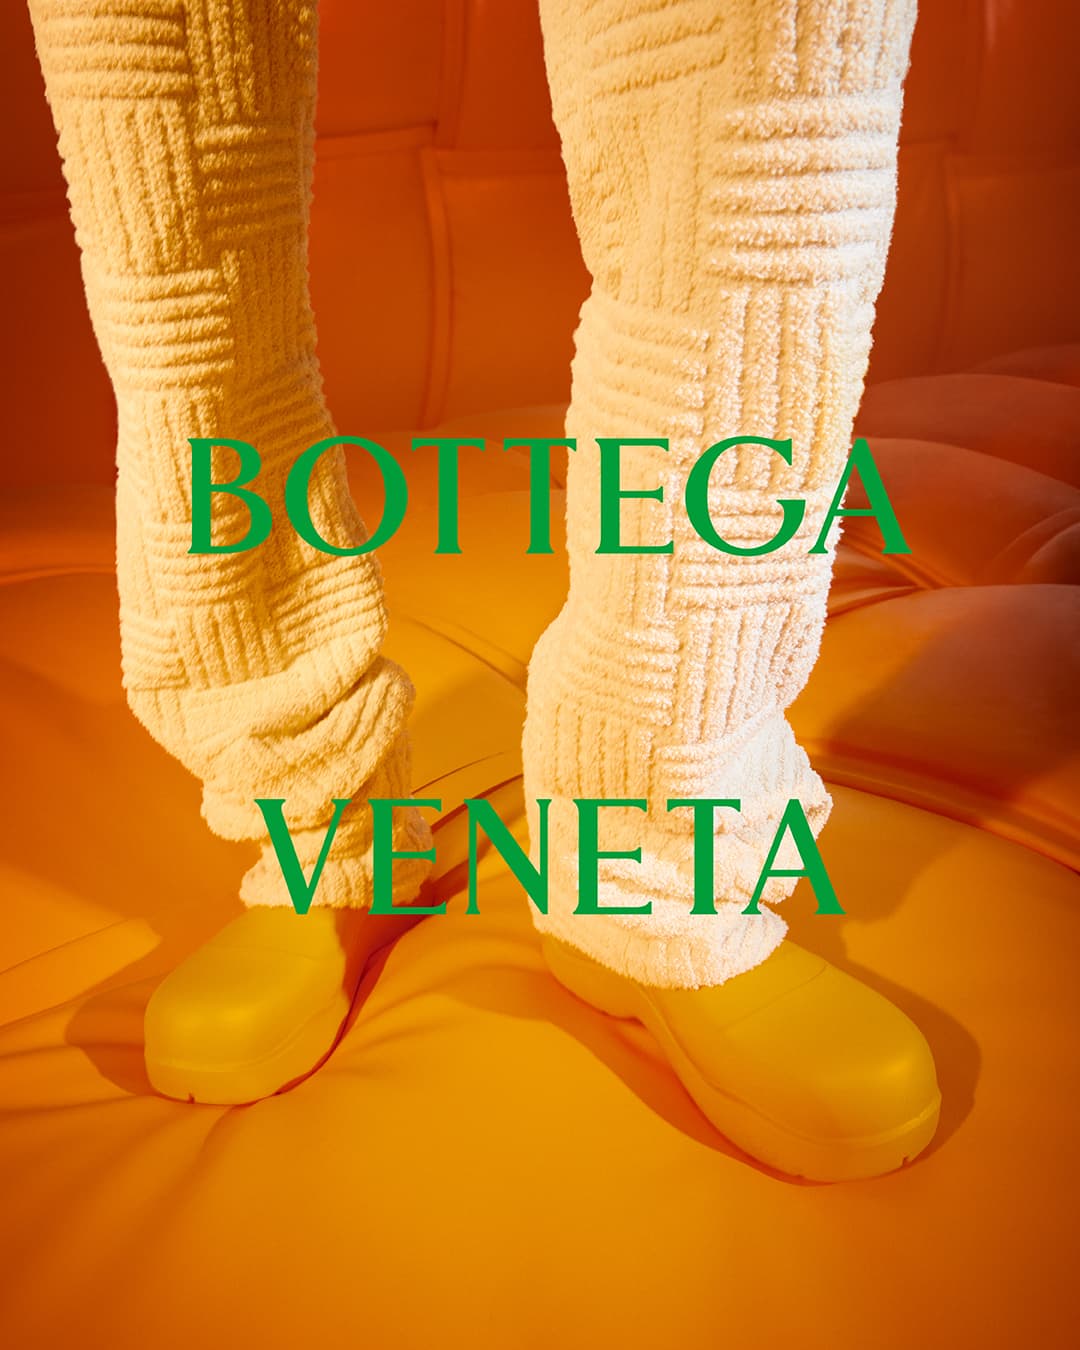 In celebration of the upcoming Chinese Lunar New Year, Bottega Veneta is taking over part of the Great Wall.